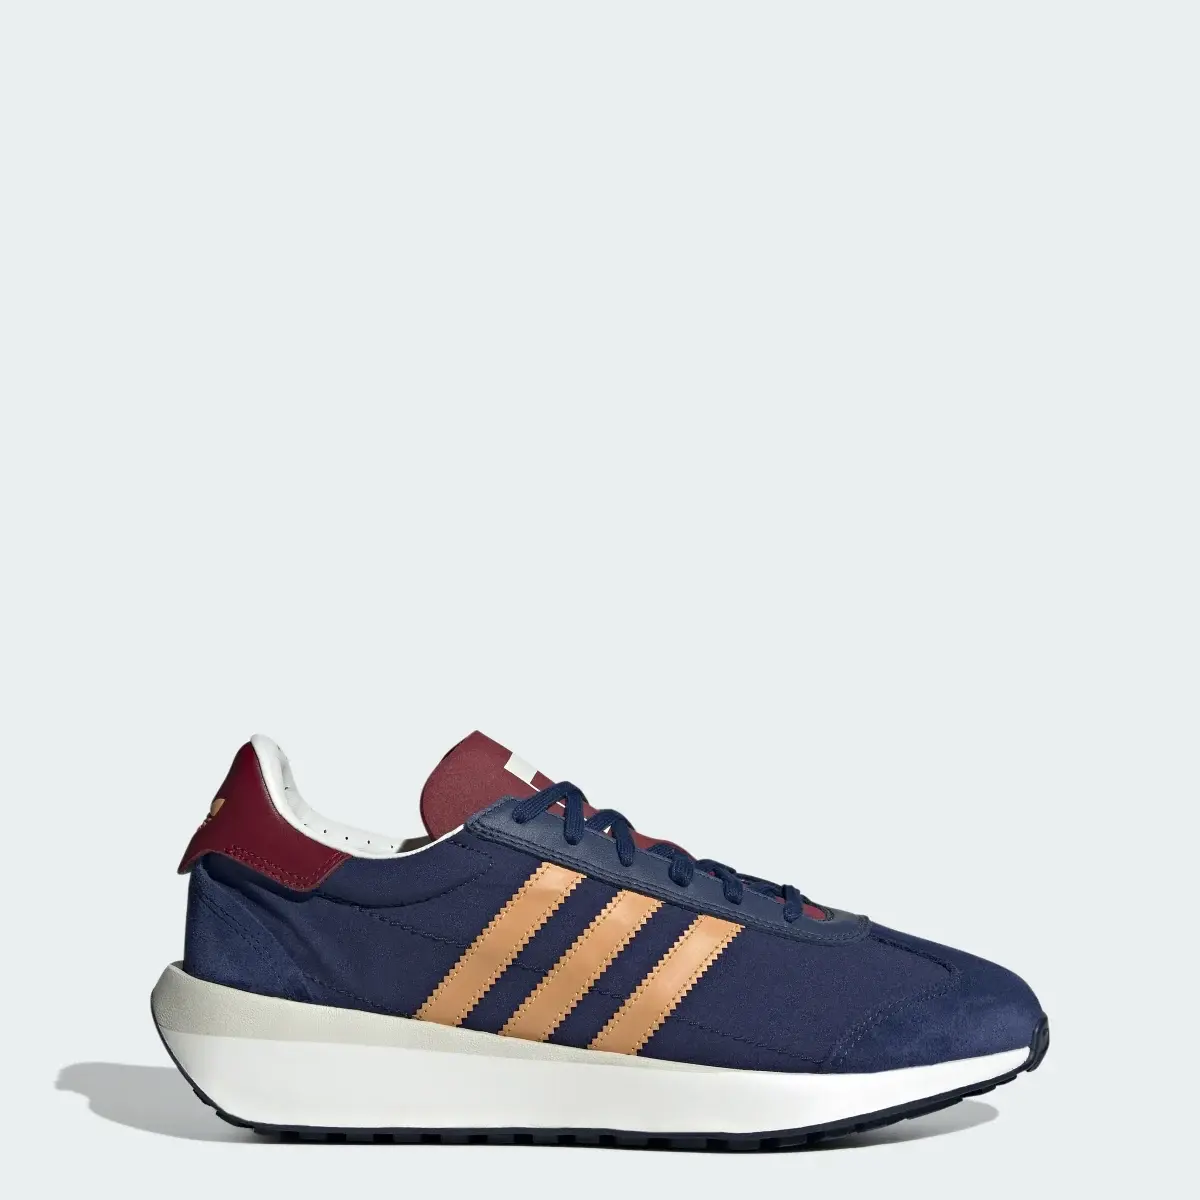 Adidas COUNTRY XLG. 1